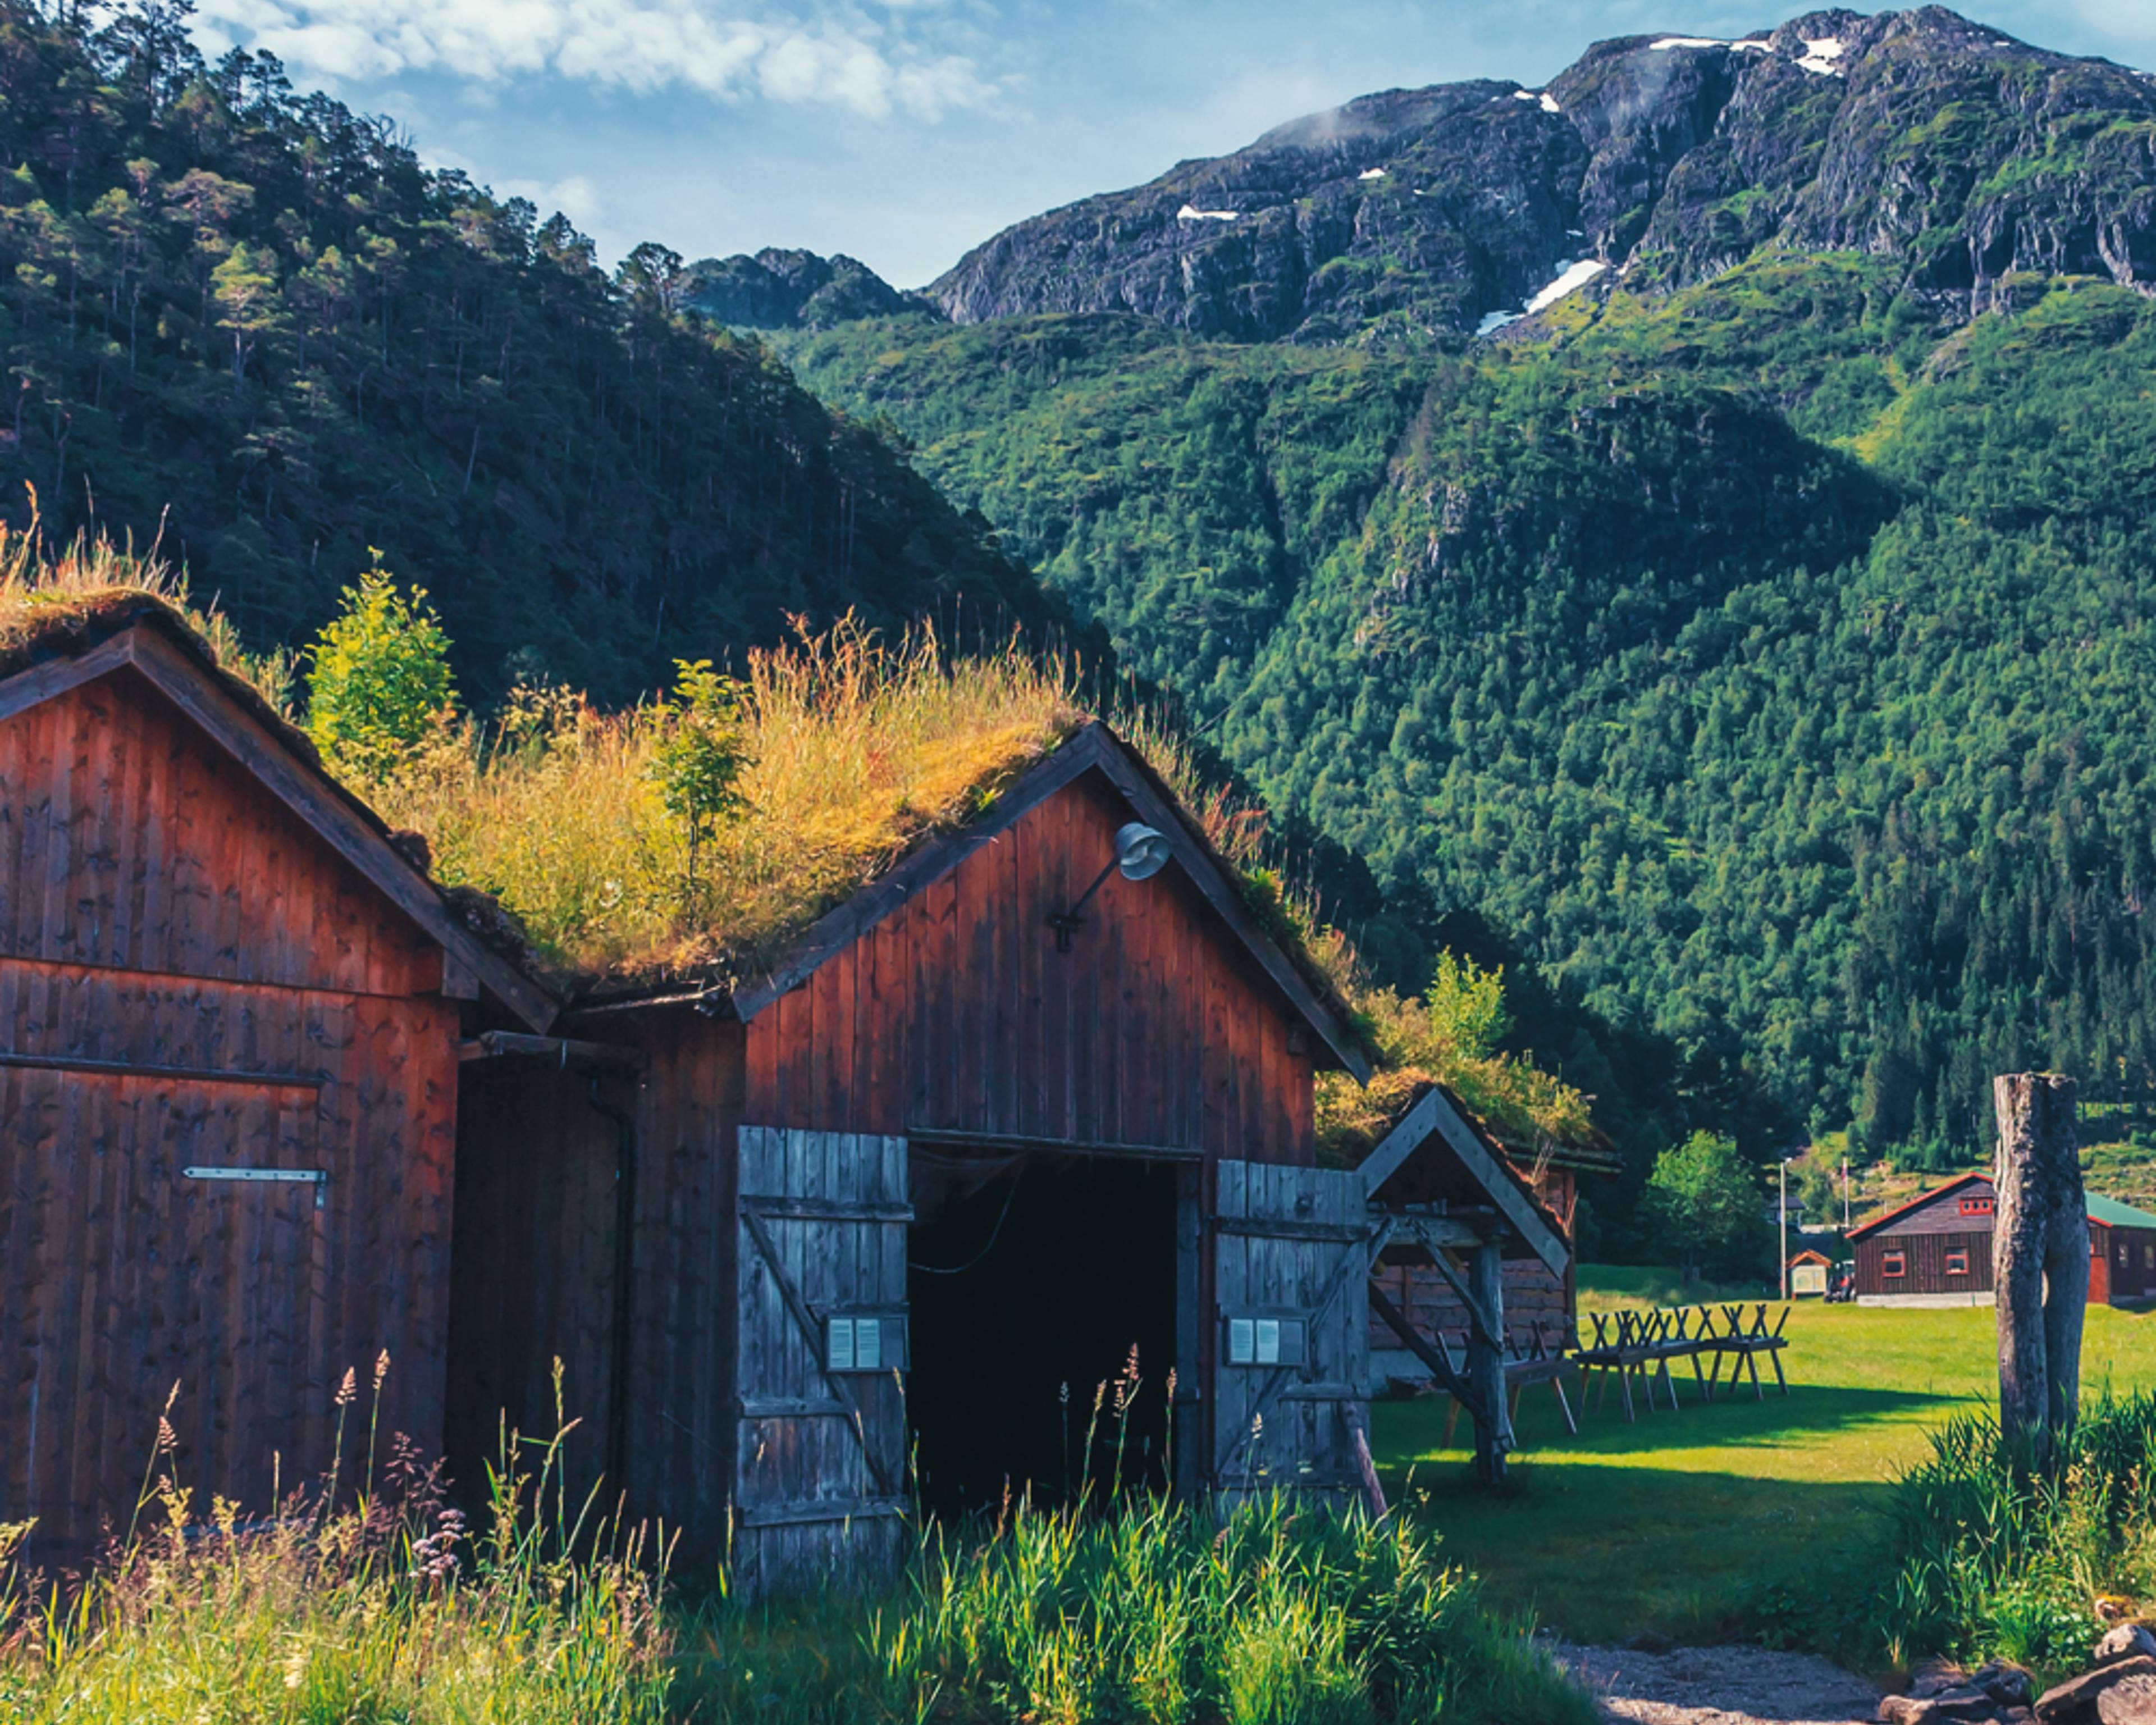 Design your perfect history tour with a local expert in Norway